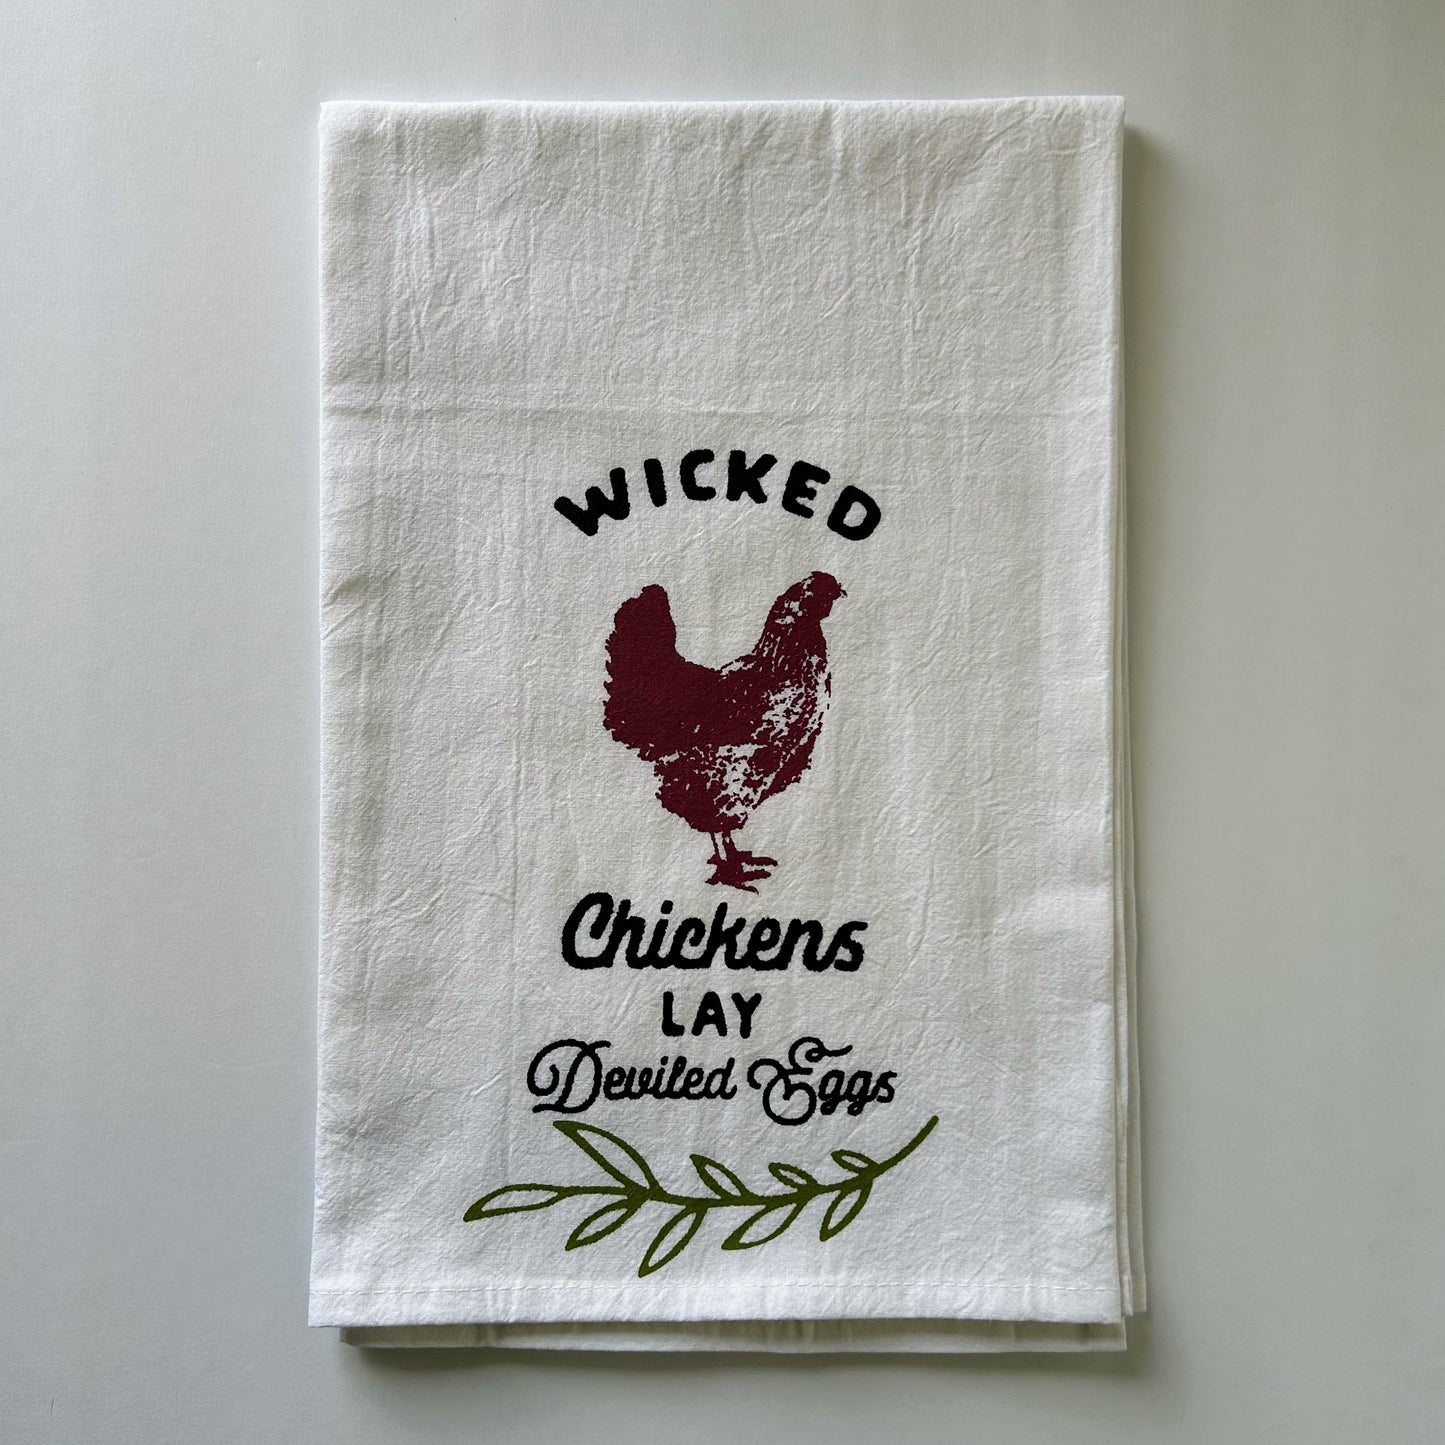 Wicked Chickens